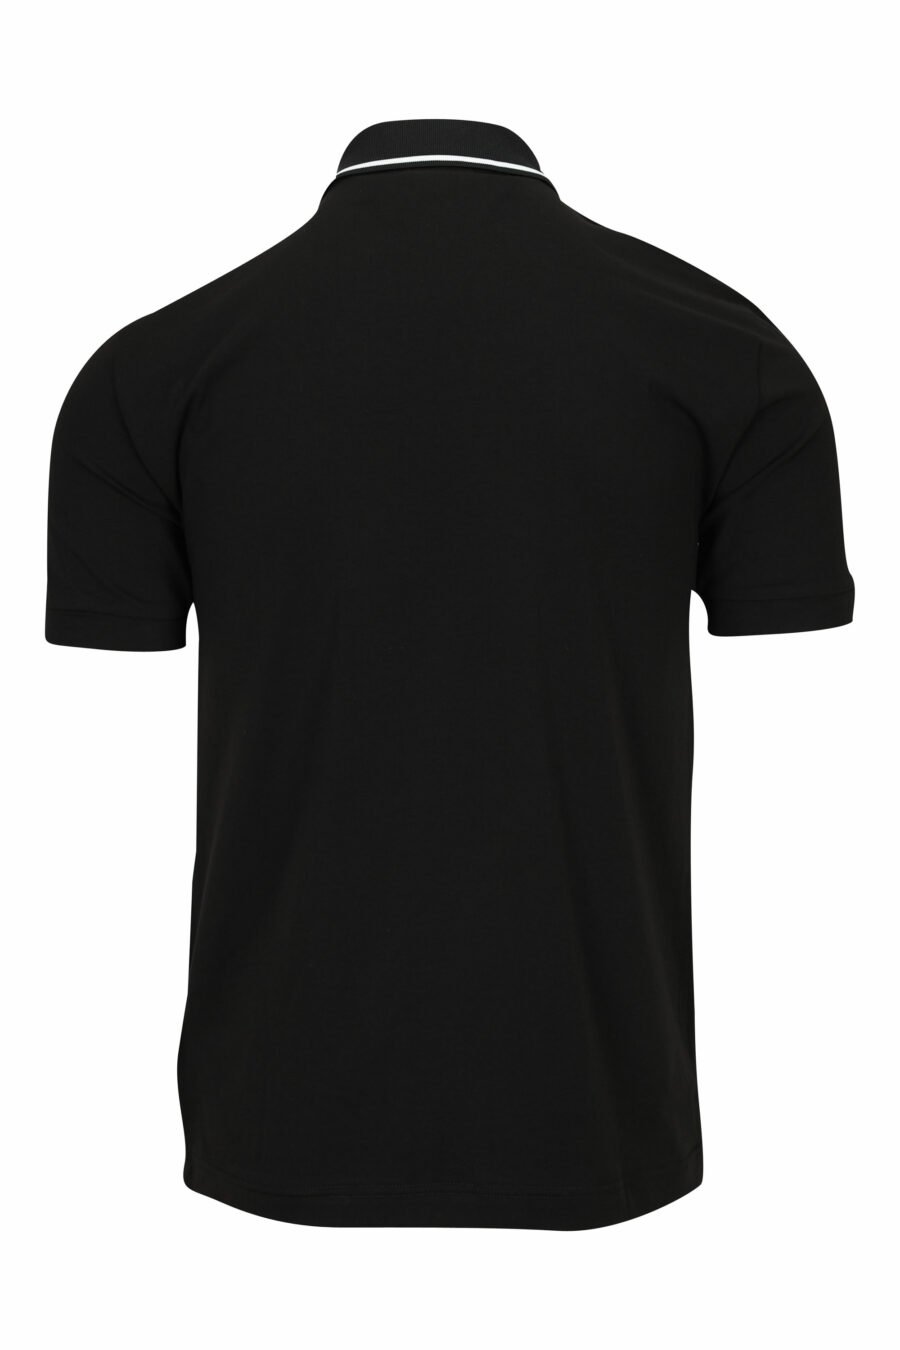 Black polo shirt with mini logo "lux identity" on shoulder band - 8058947458943 1